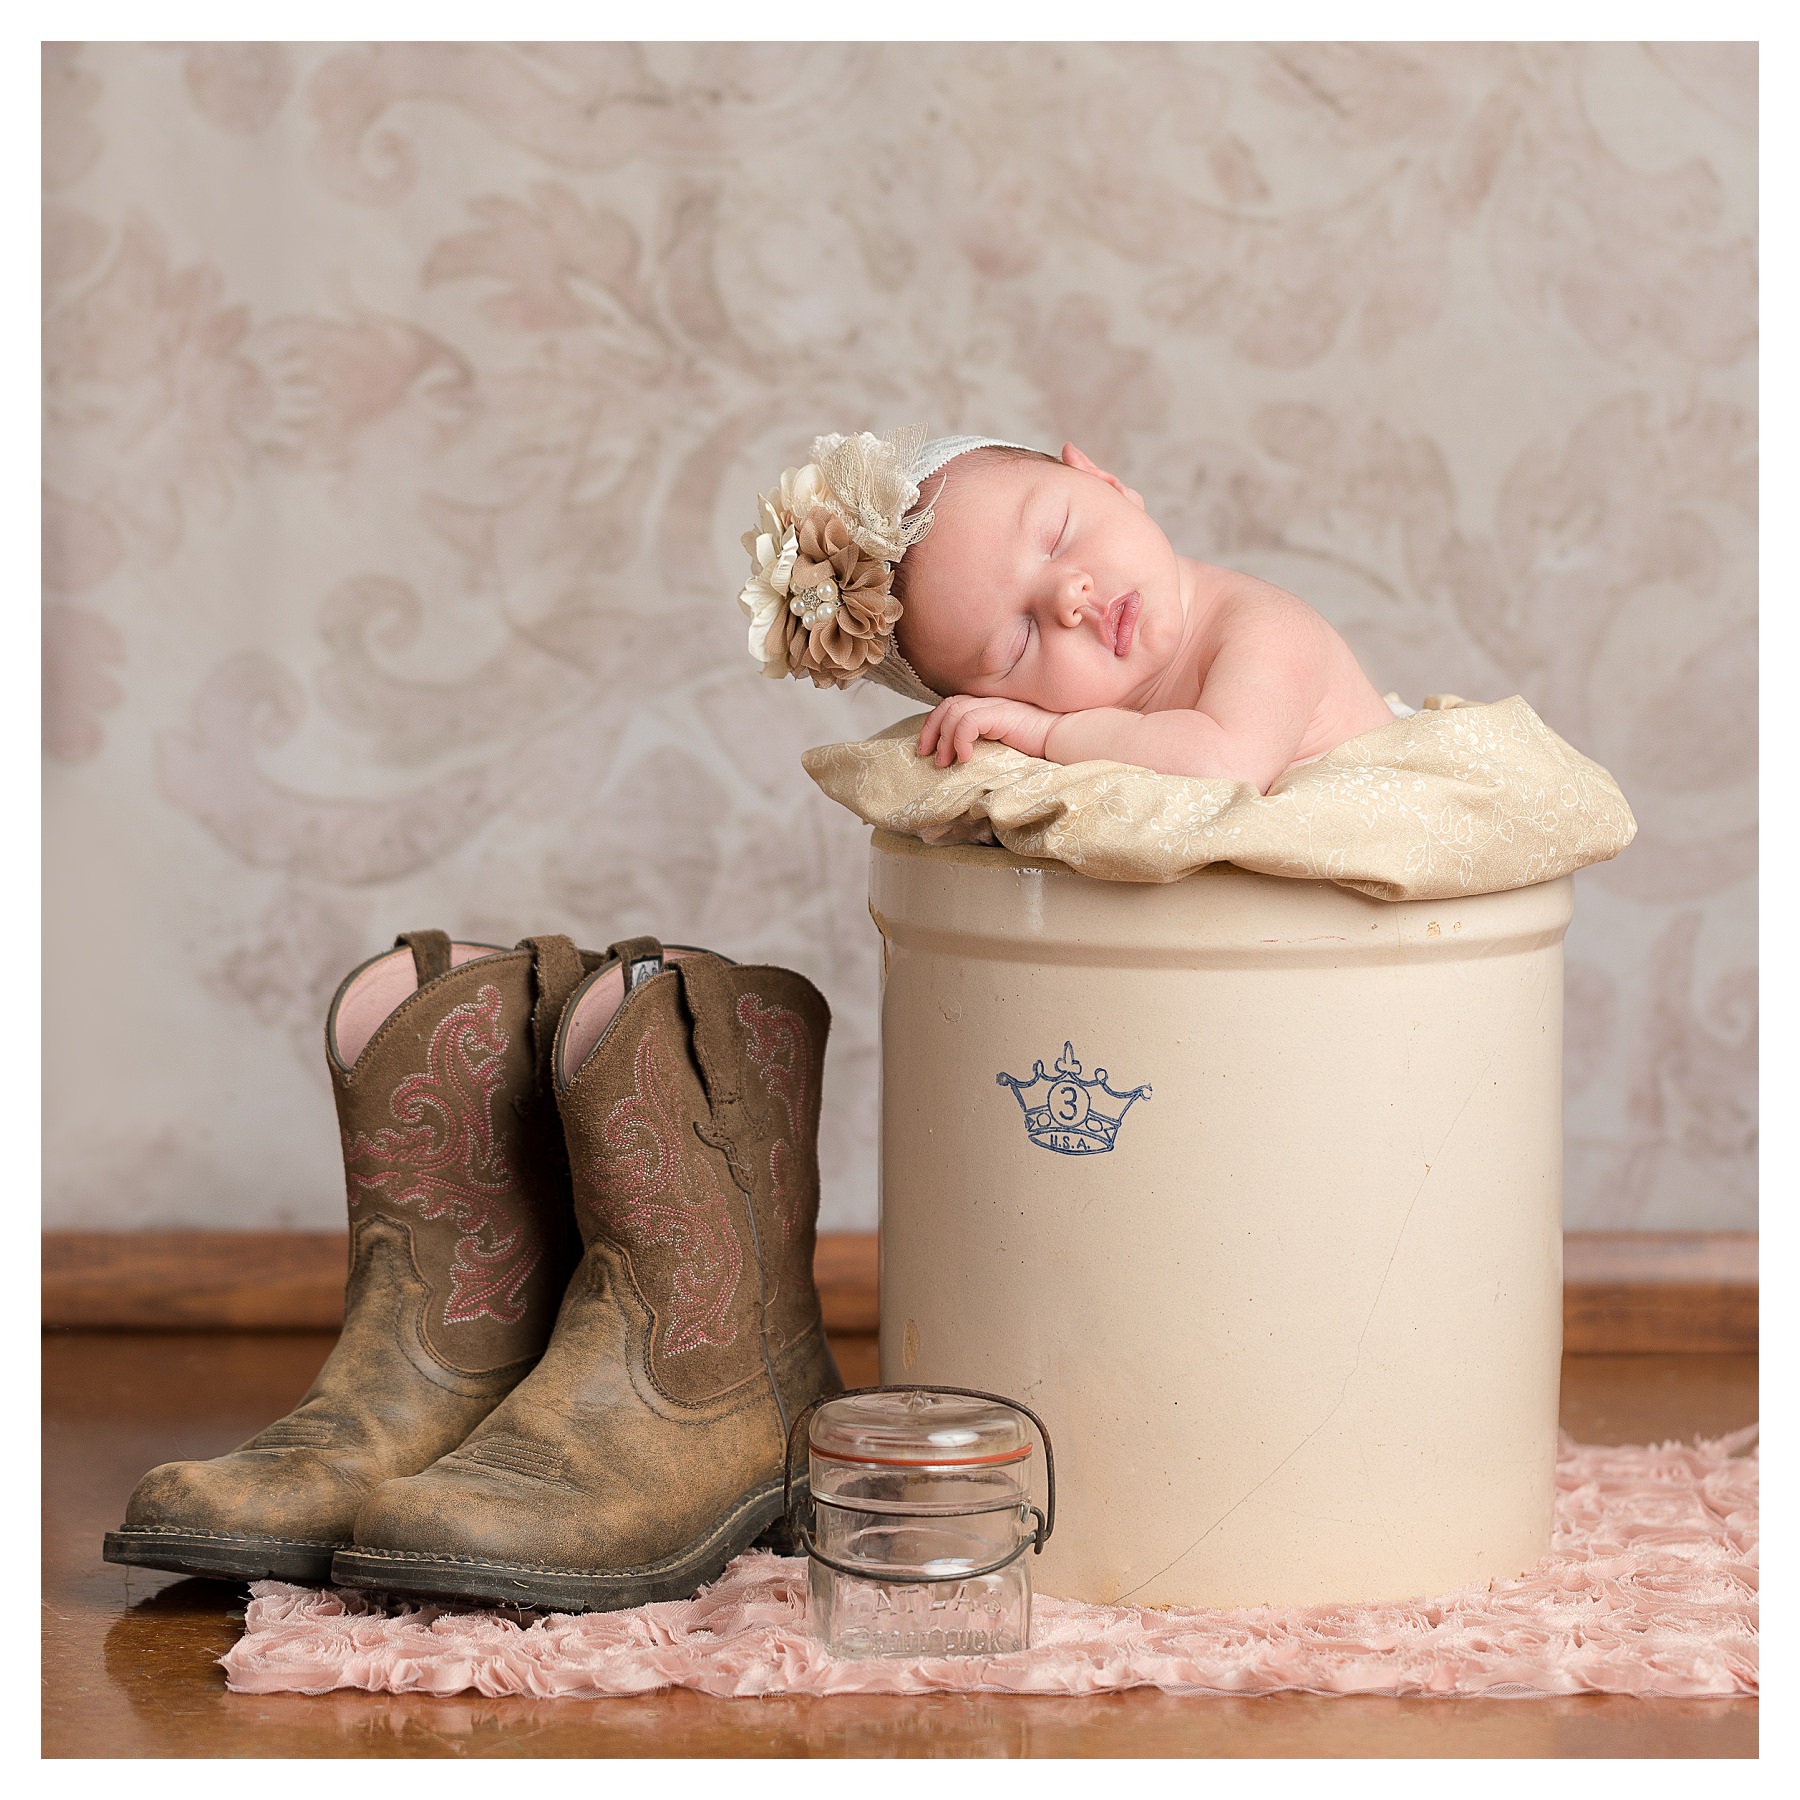 newborn in antique crock with cowboy boots